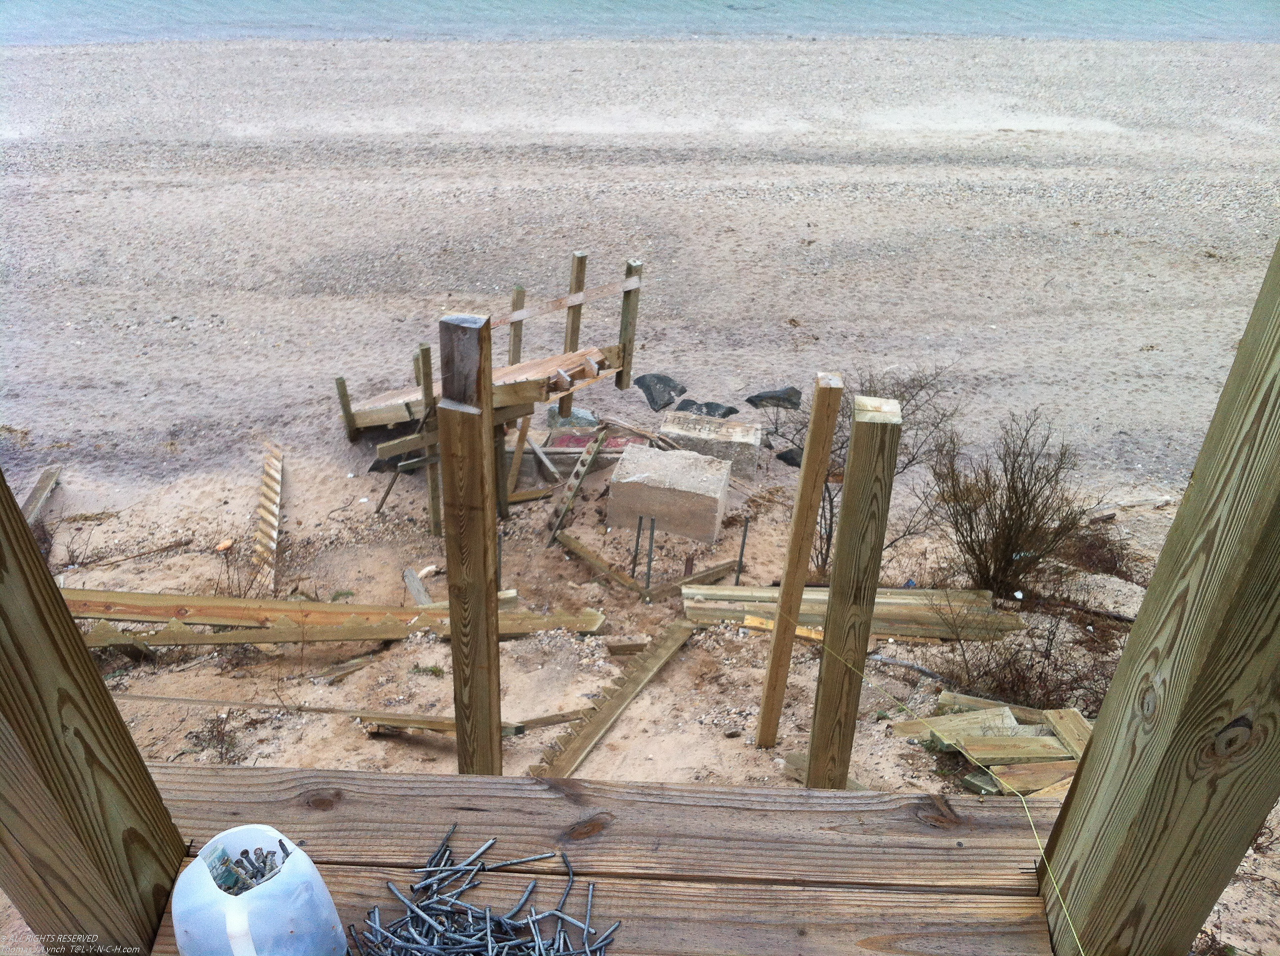 Our stairs to the beach are down for over 2 years now.  ~~  Maybe they will get fixed this Spring?